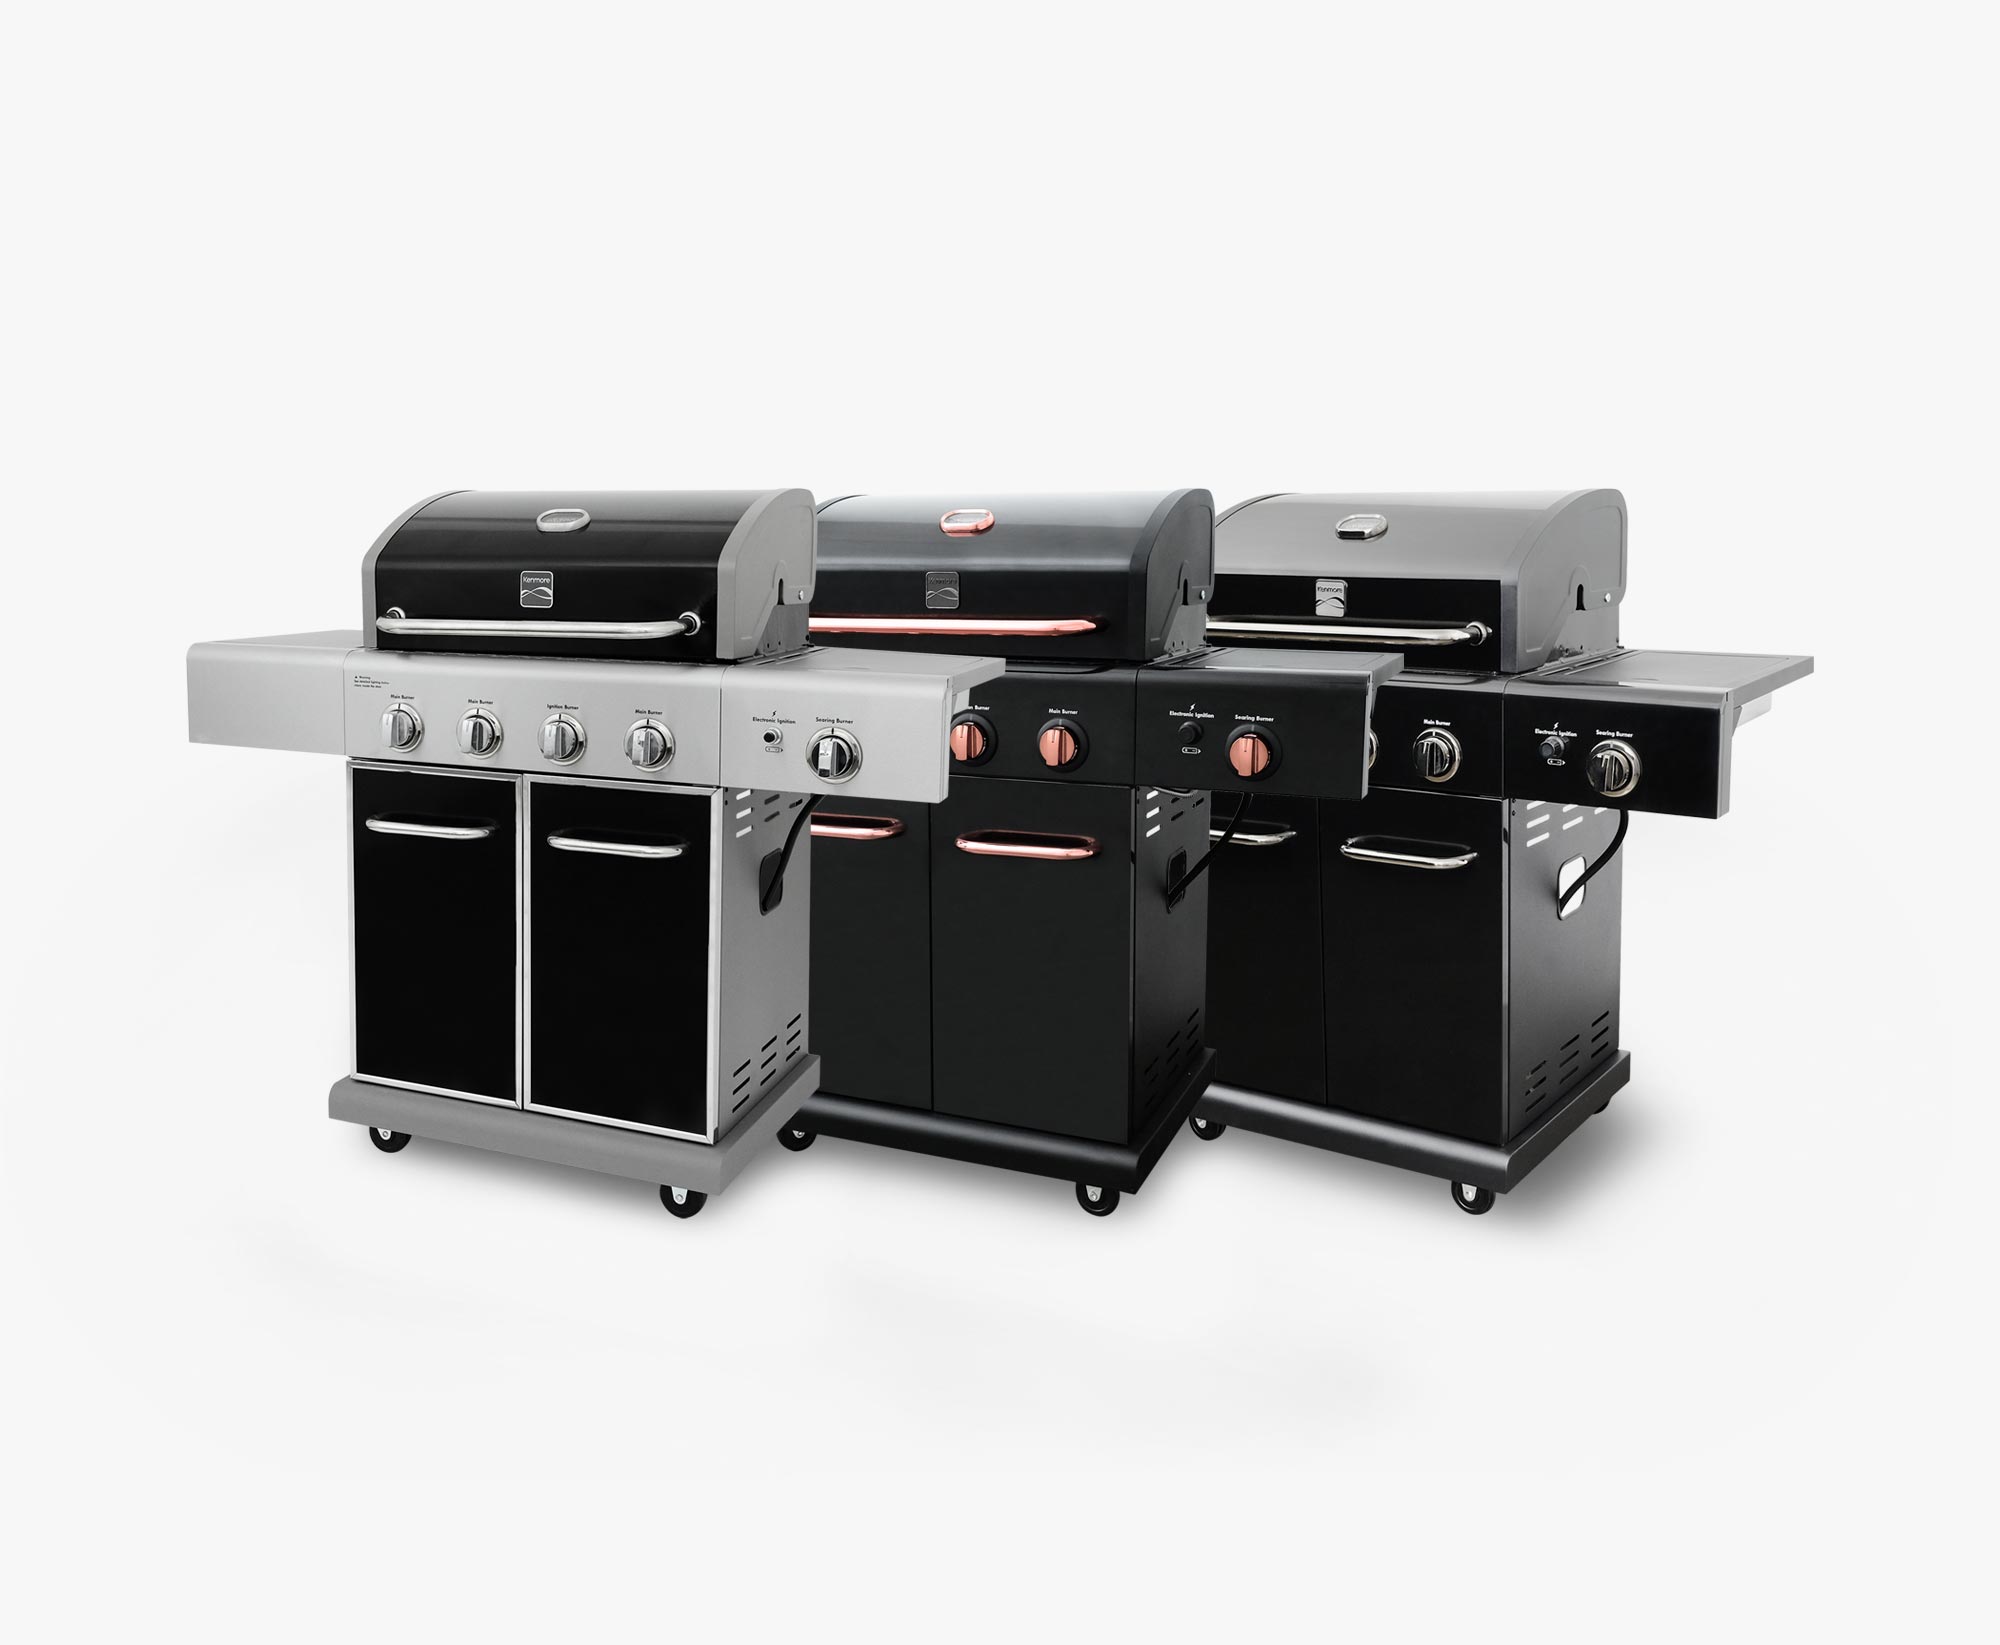 https://kenmoregrill.com/wp-content/uploads/sites/3/2022/05/product-image-kenmore-4-burner-gas-grill-with-side-searing-burner-PG-40409S0LB-1-black-with-chrome-6.jpg